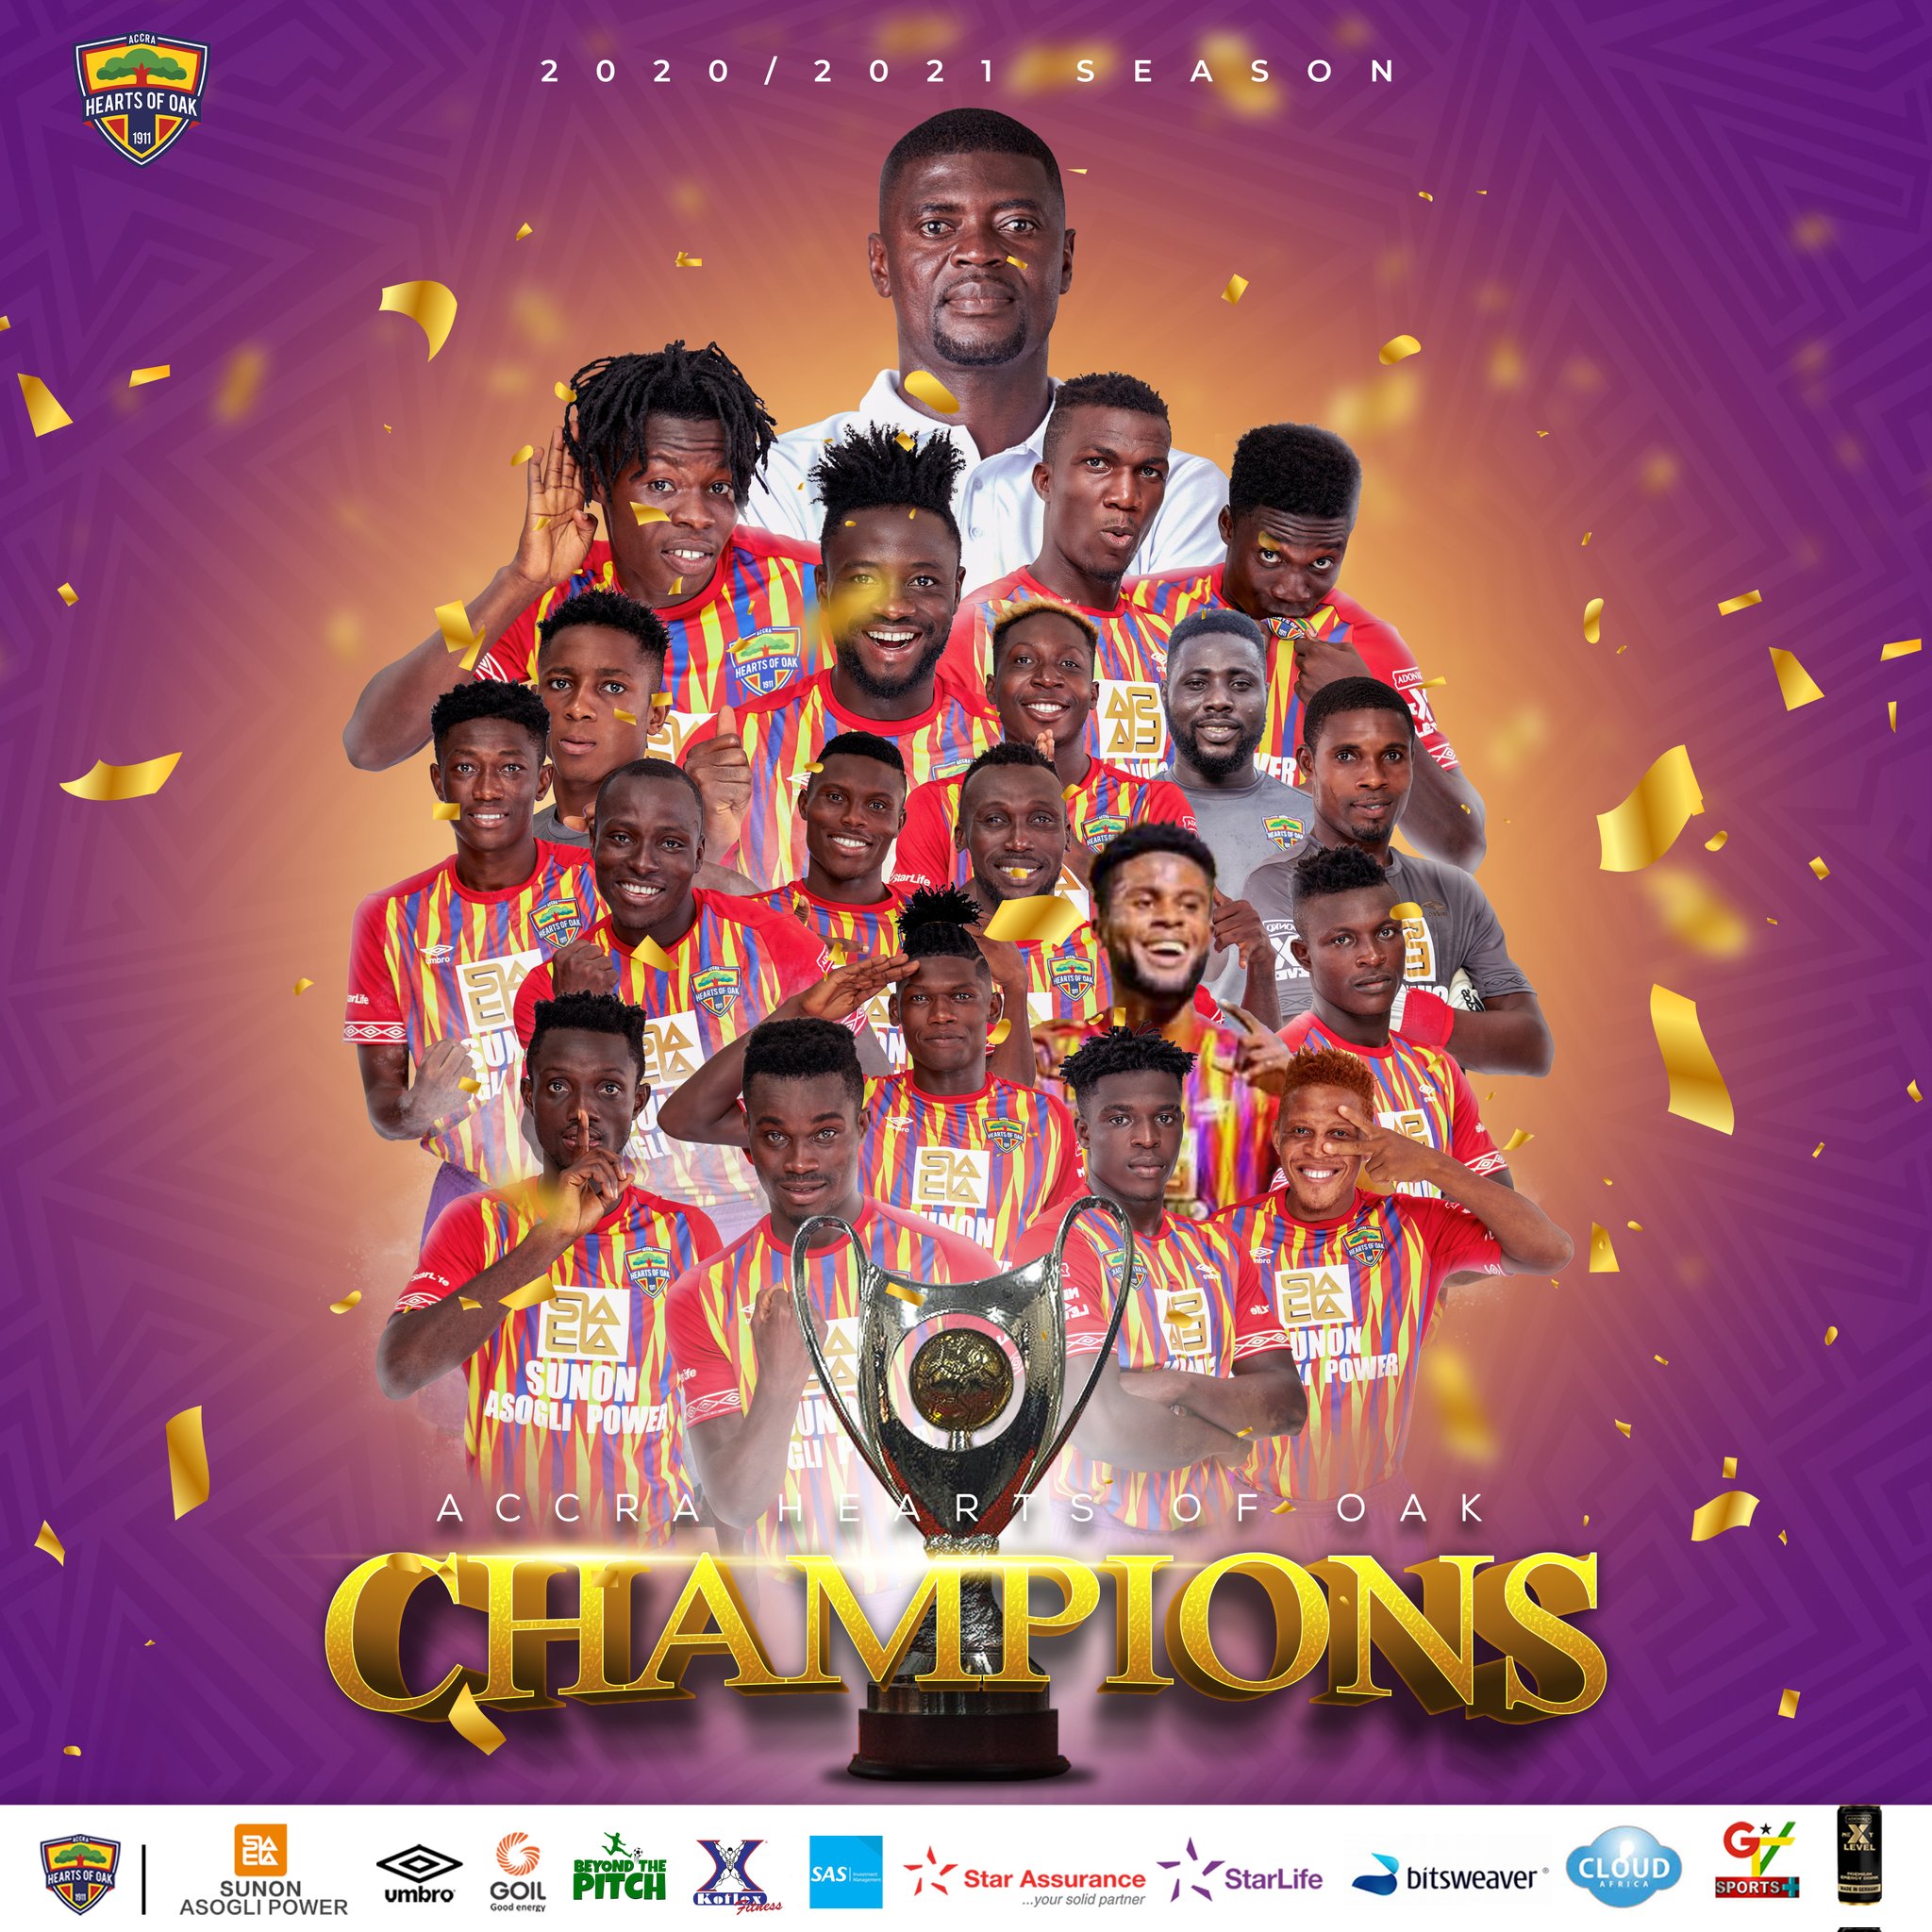 PHOTOS: Hearts of Oak draw 1-1 with Liberty Professionals to clinch 20/21 league title